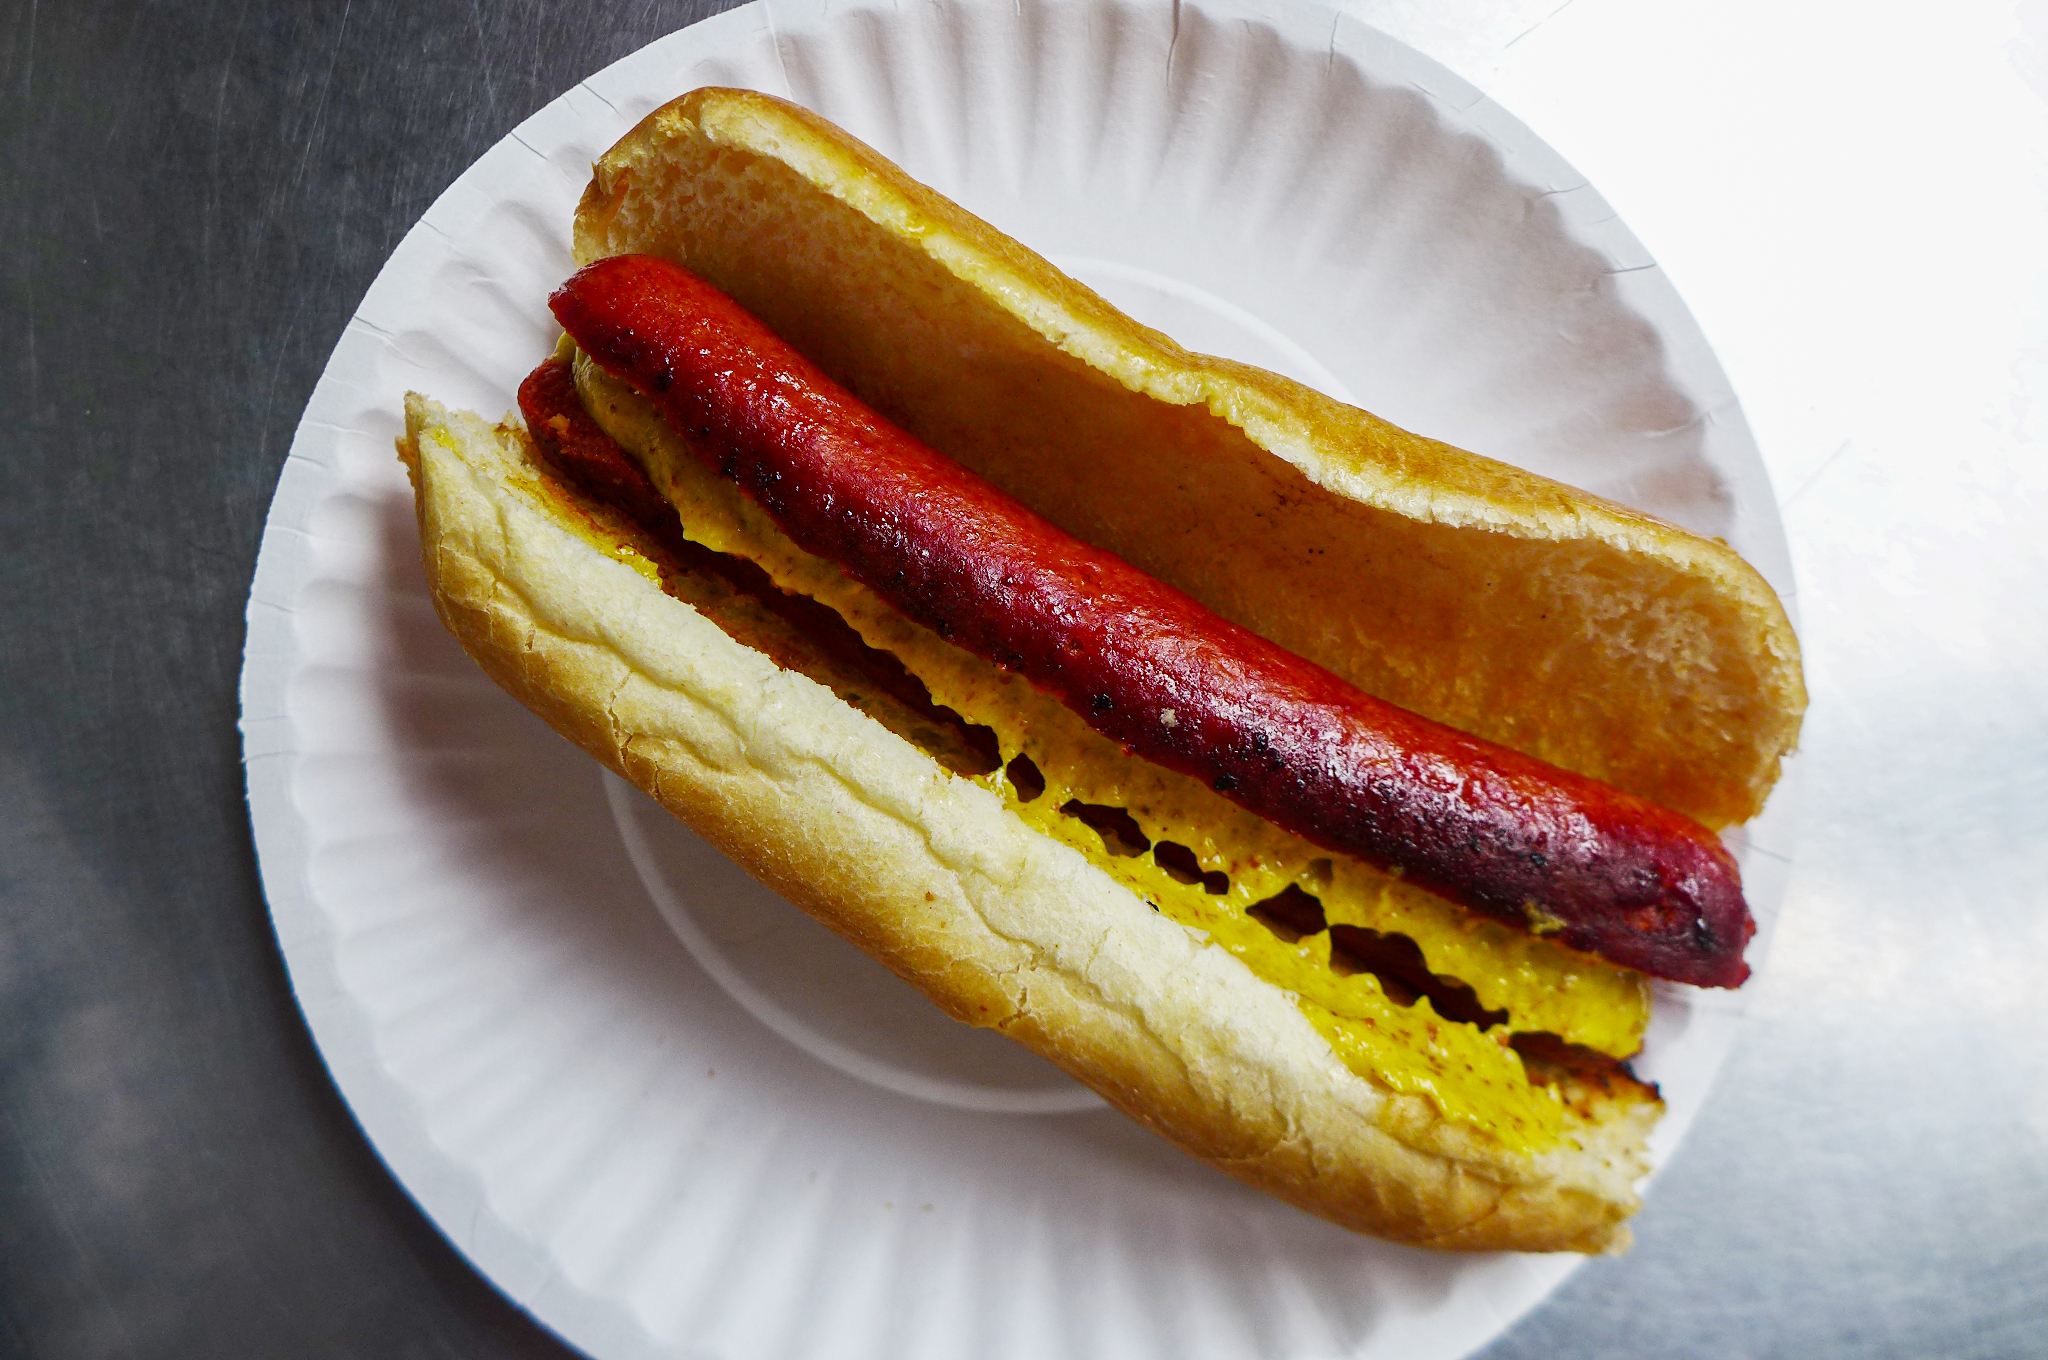 A hot dog with yellow mustard and a bun.